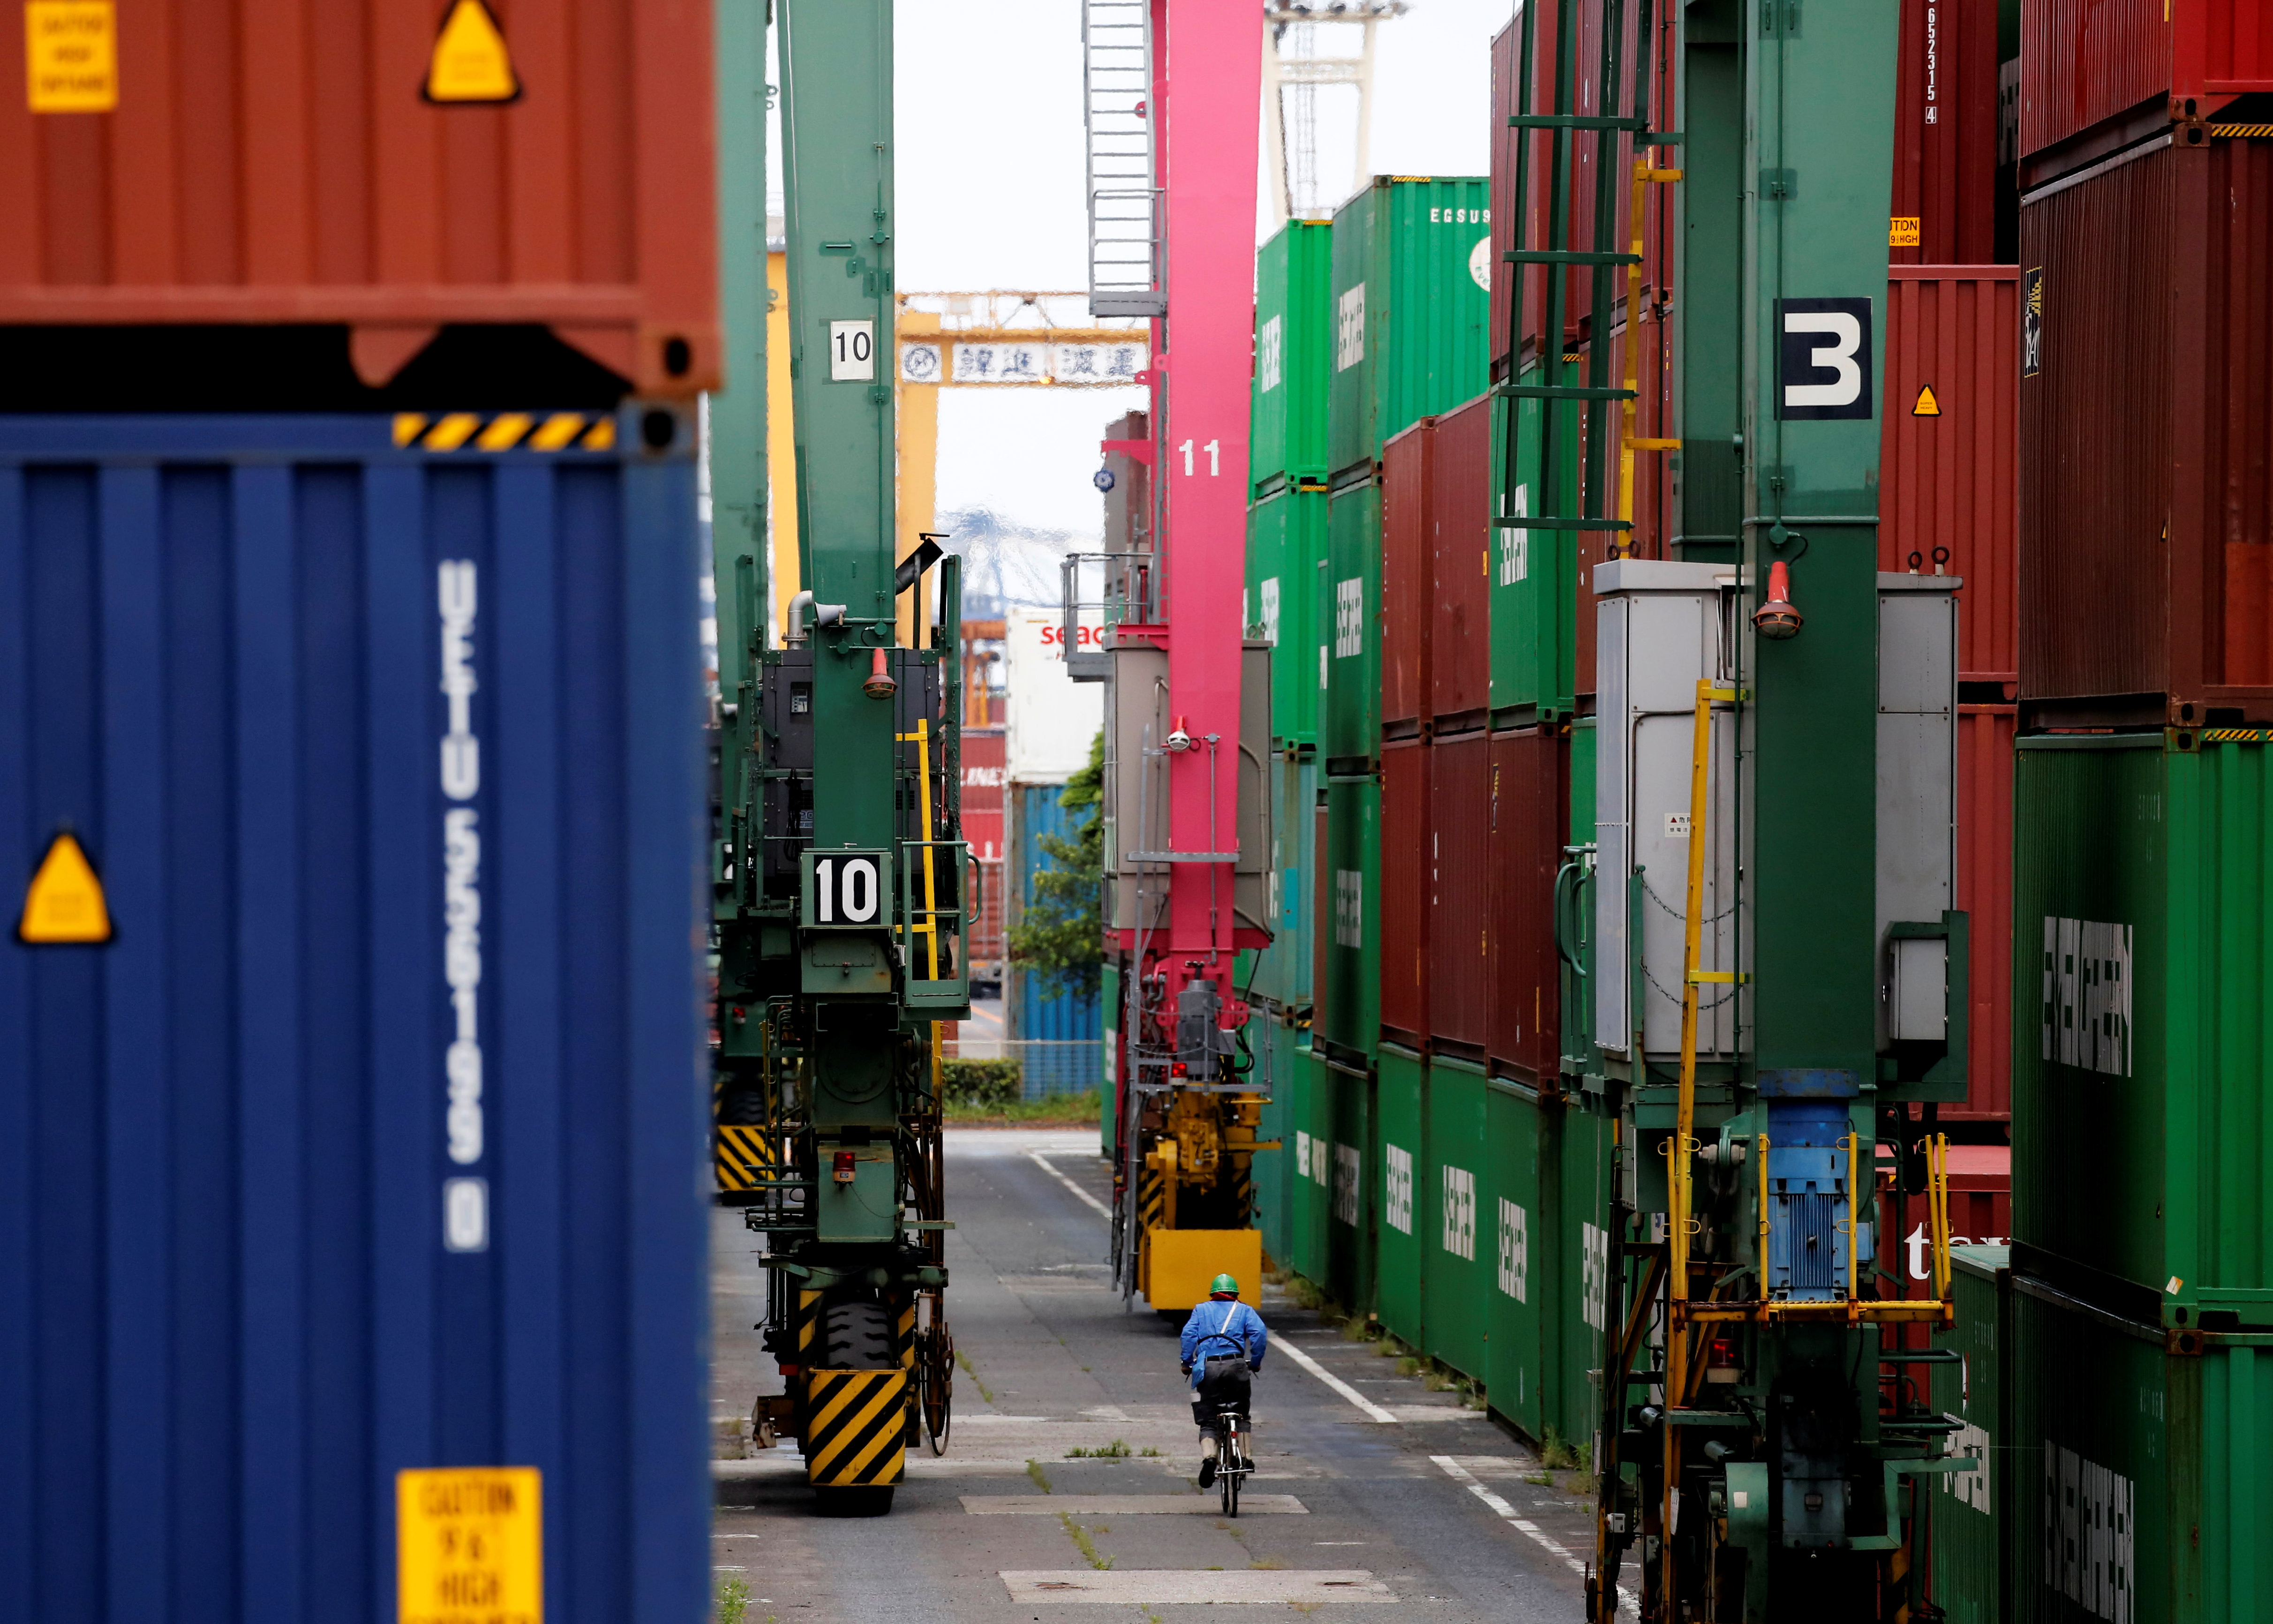 A man in a bicycle drives past containers at an industrial port in Tokyo